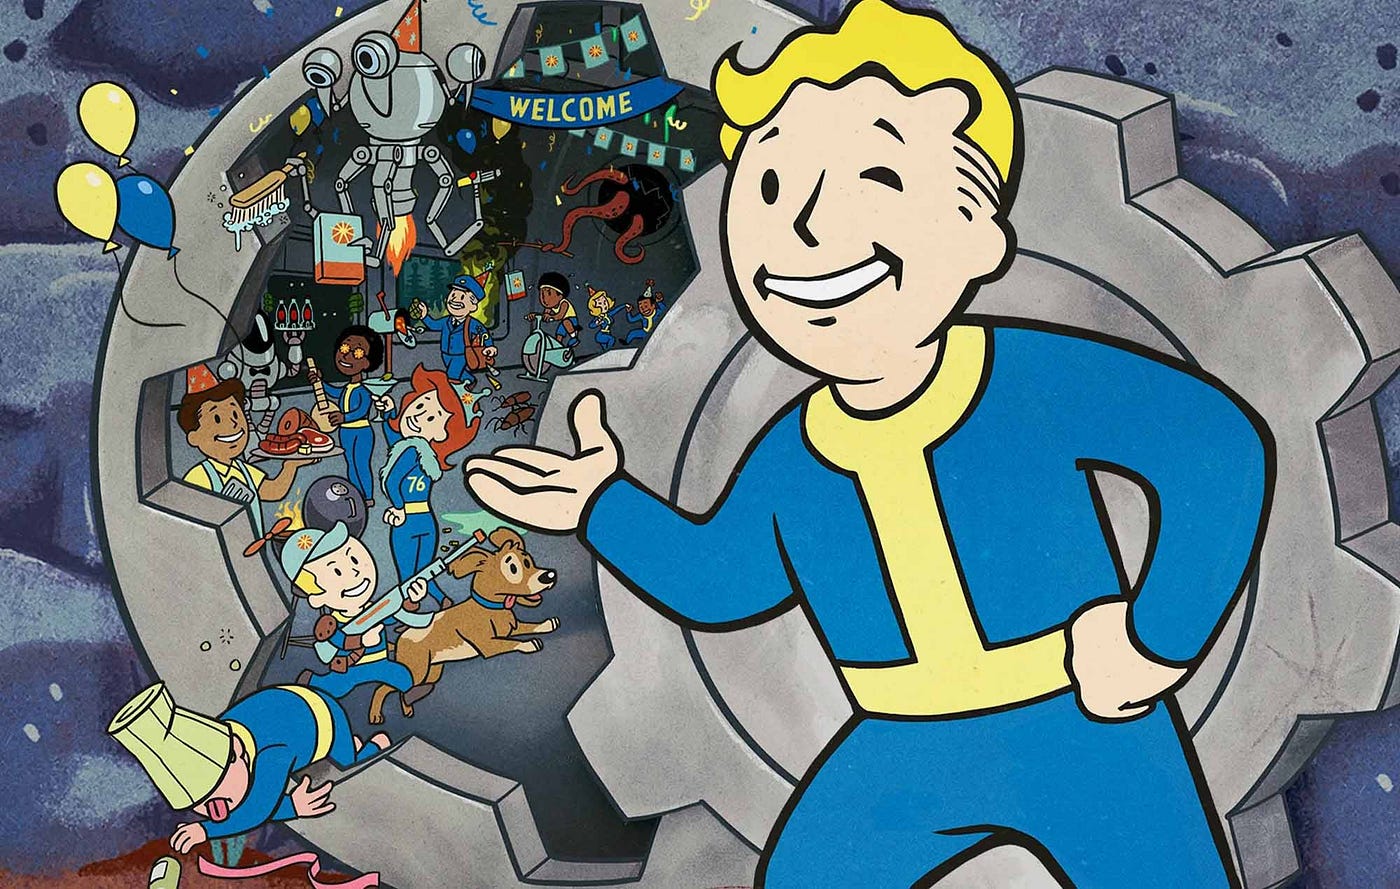 The Evolution of Bethesda Game Studios: A Journey through Gaming Excellence, by Dhruv Sahore